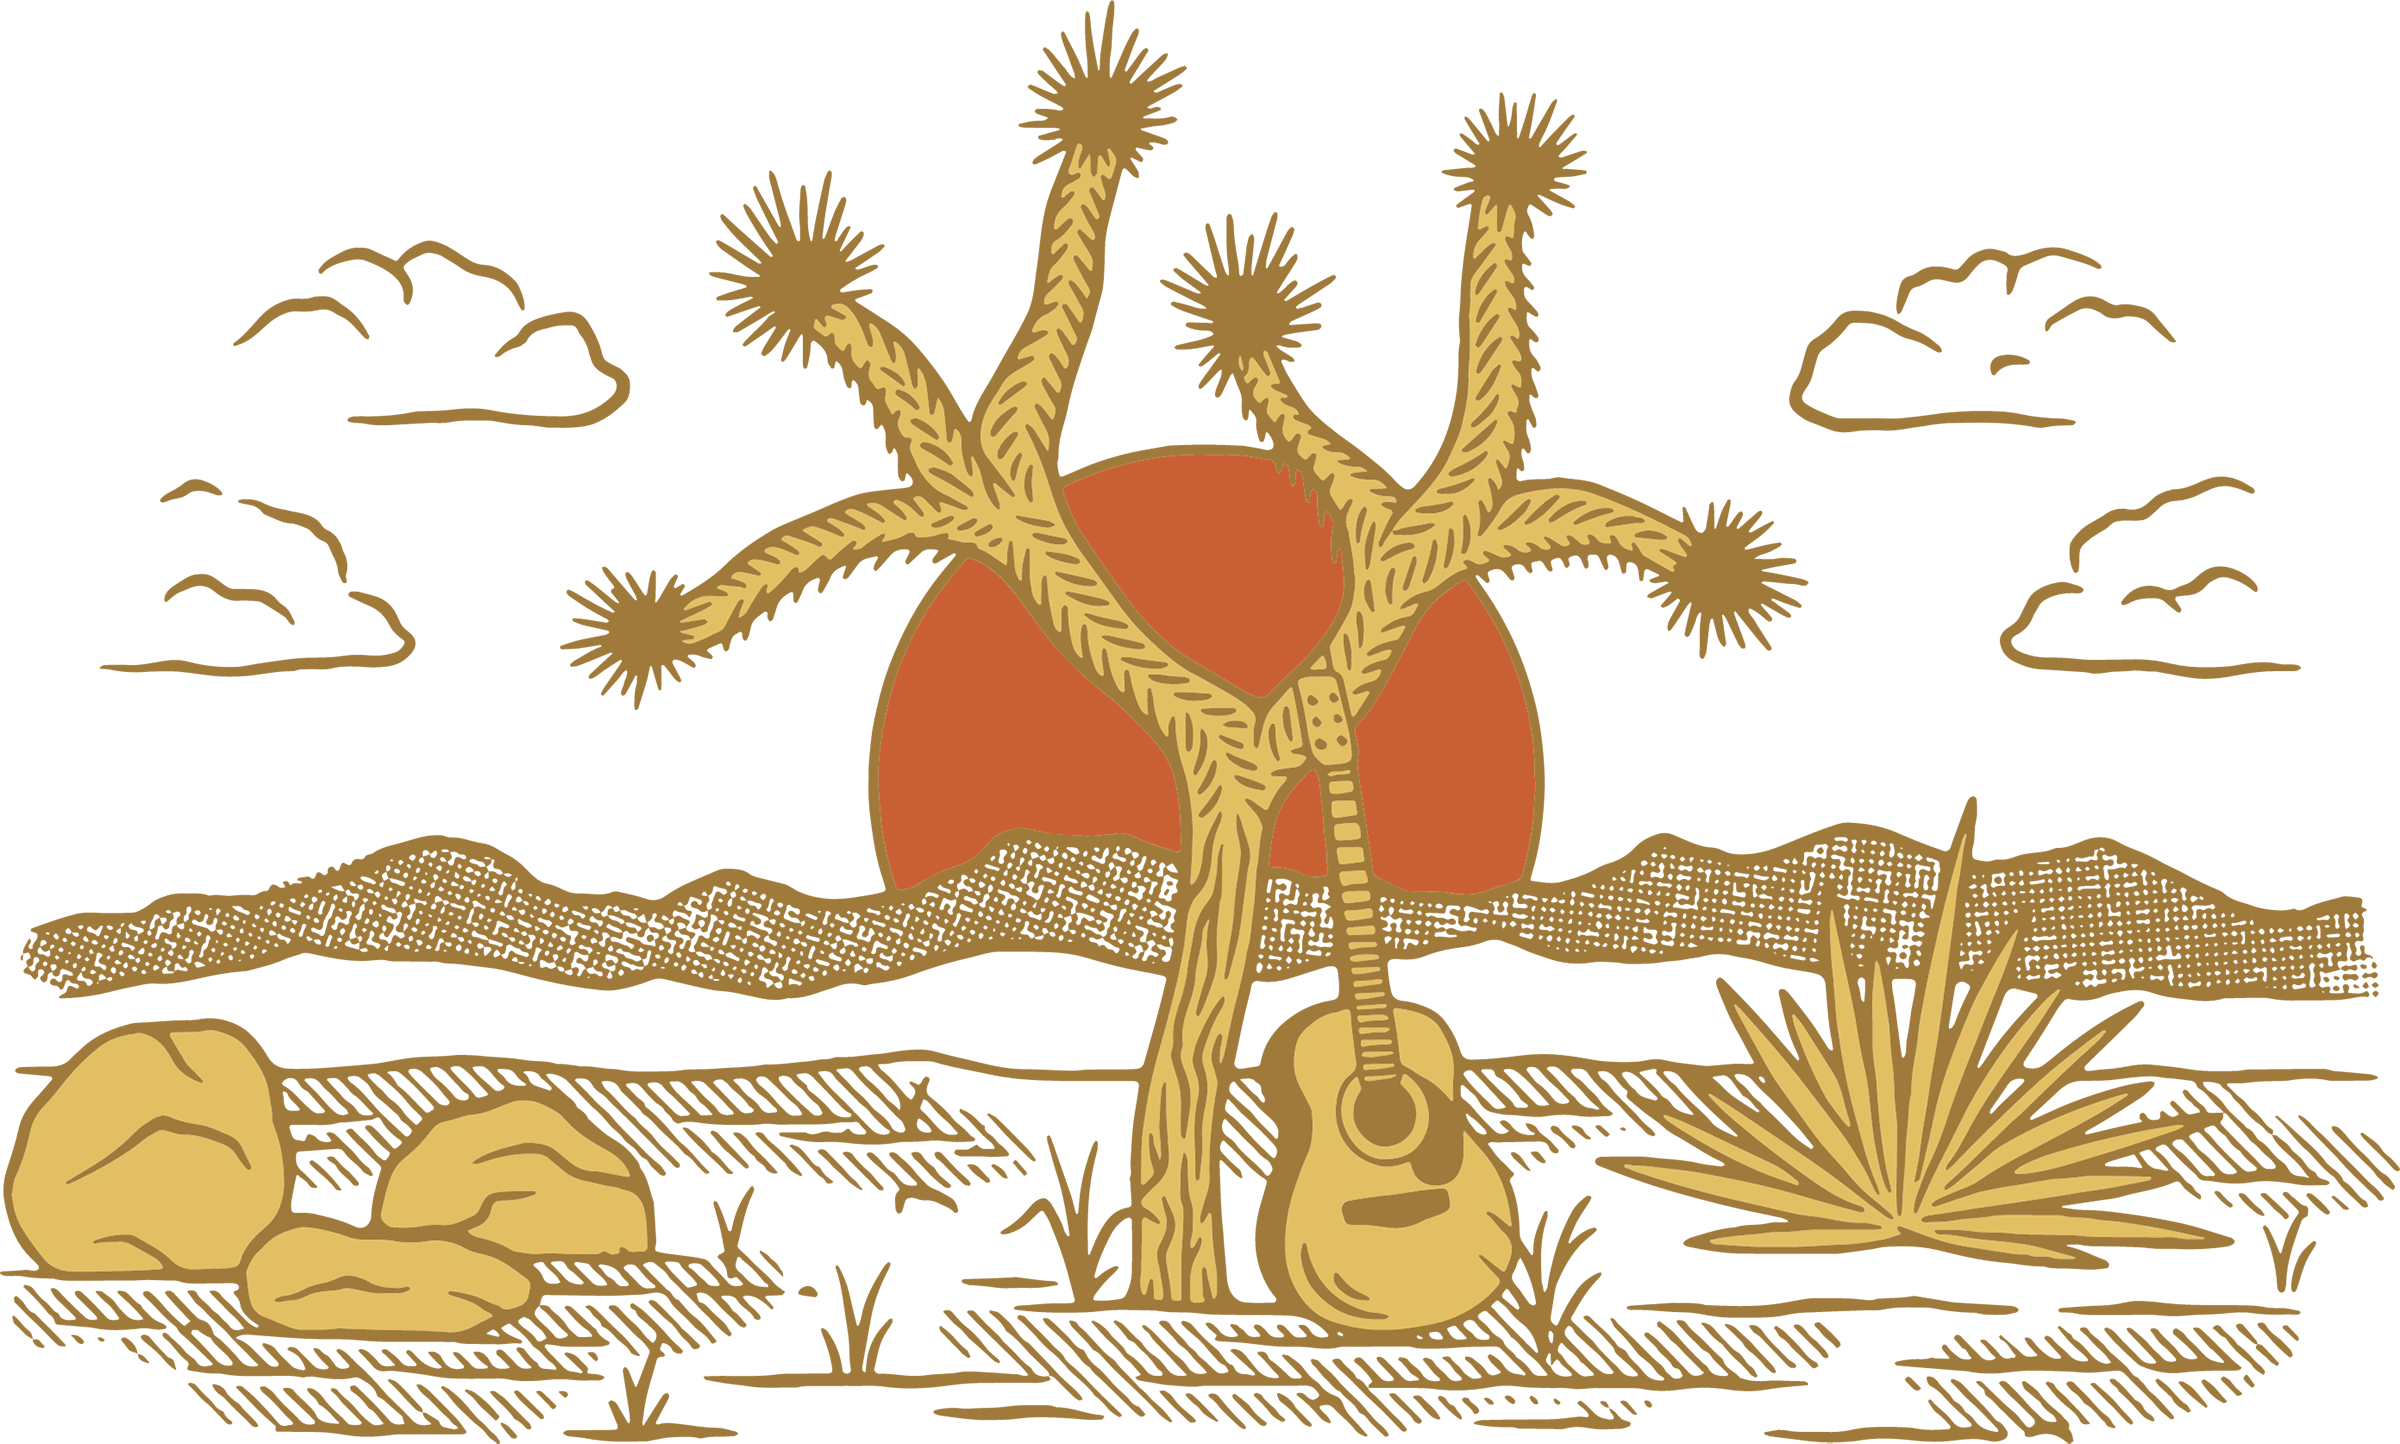 A guitar rests against a cactus with a sunset in the background